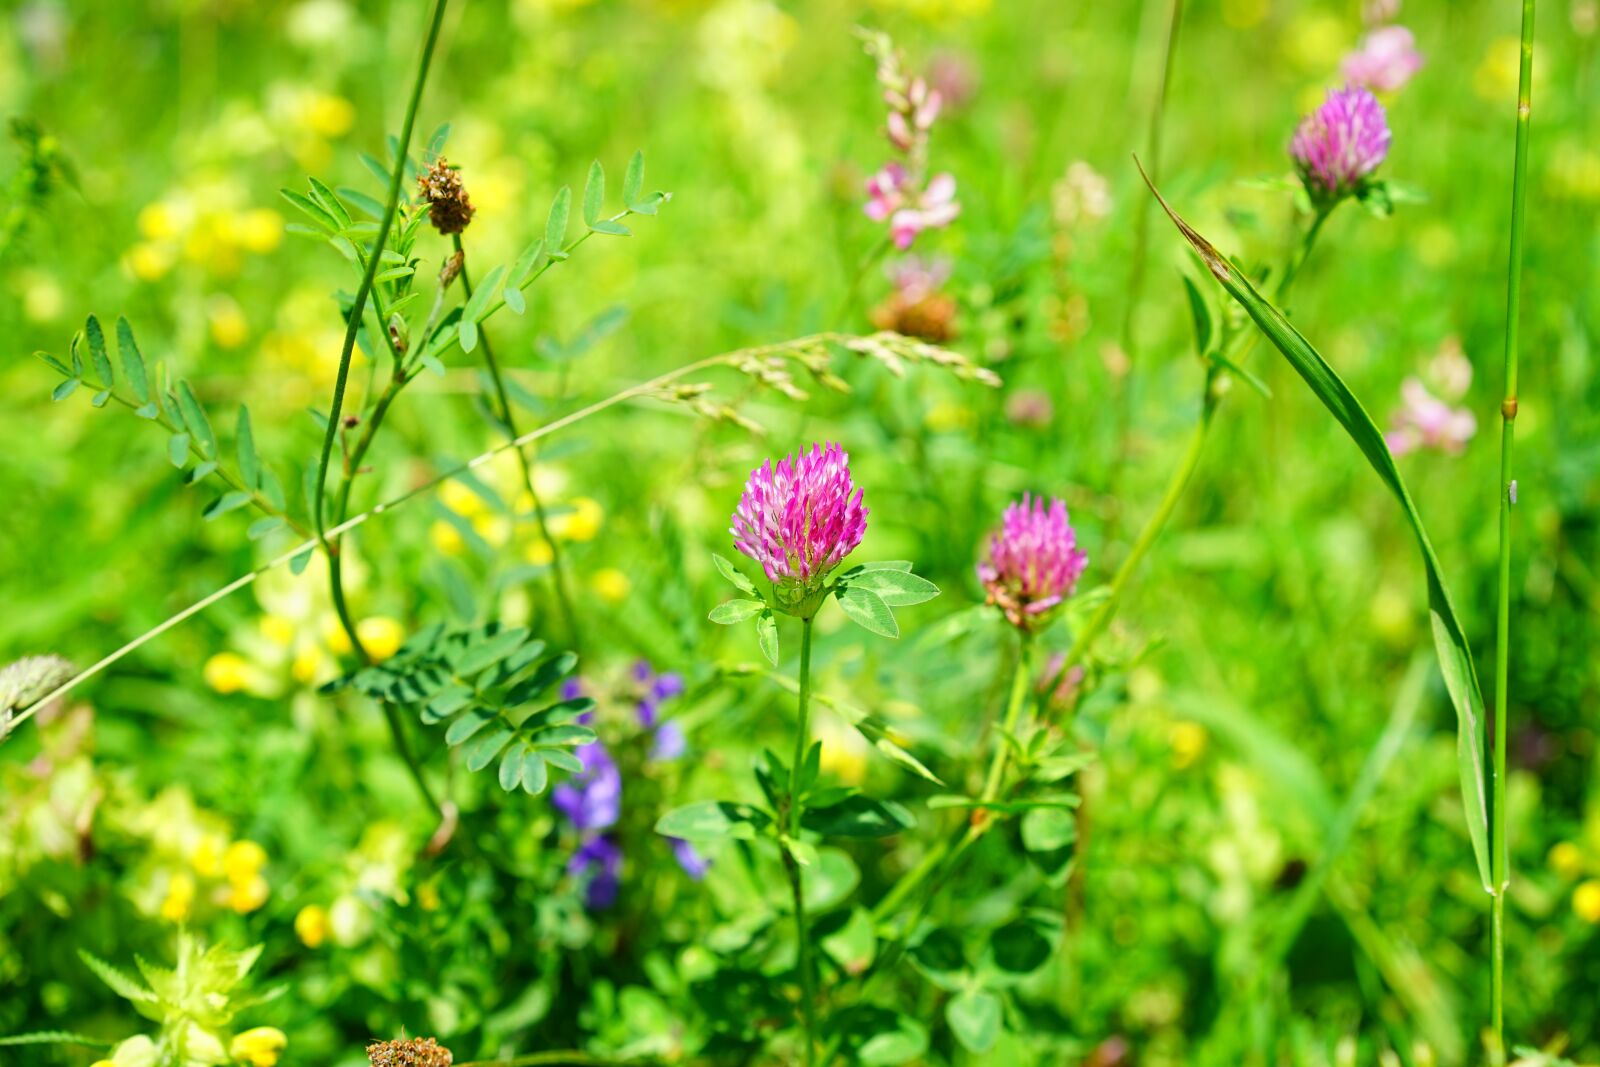 Sony a7 sample photo. Red clover, klee, pointed photography